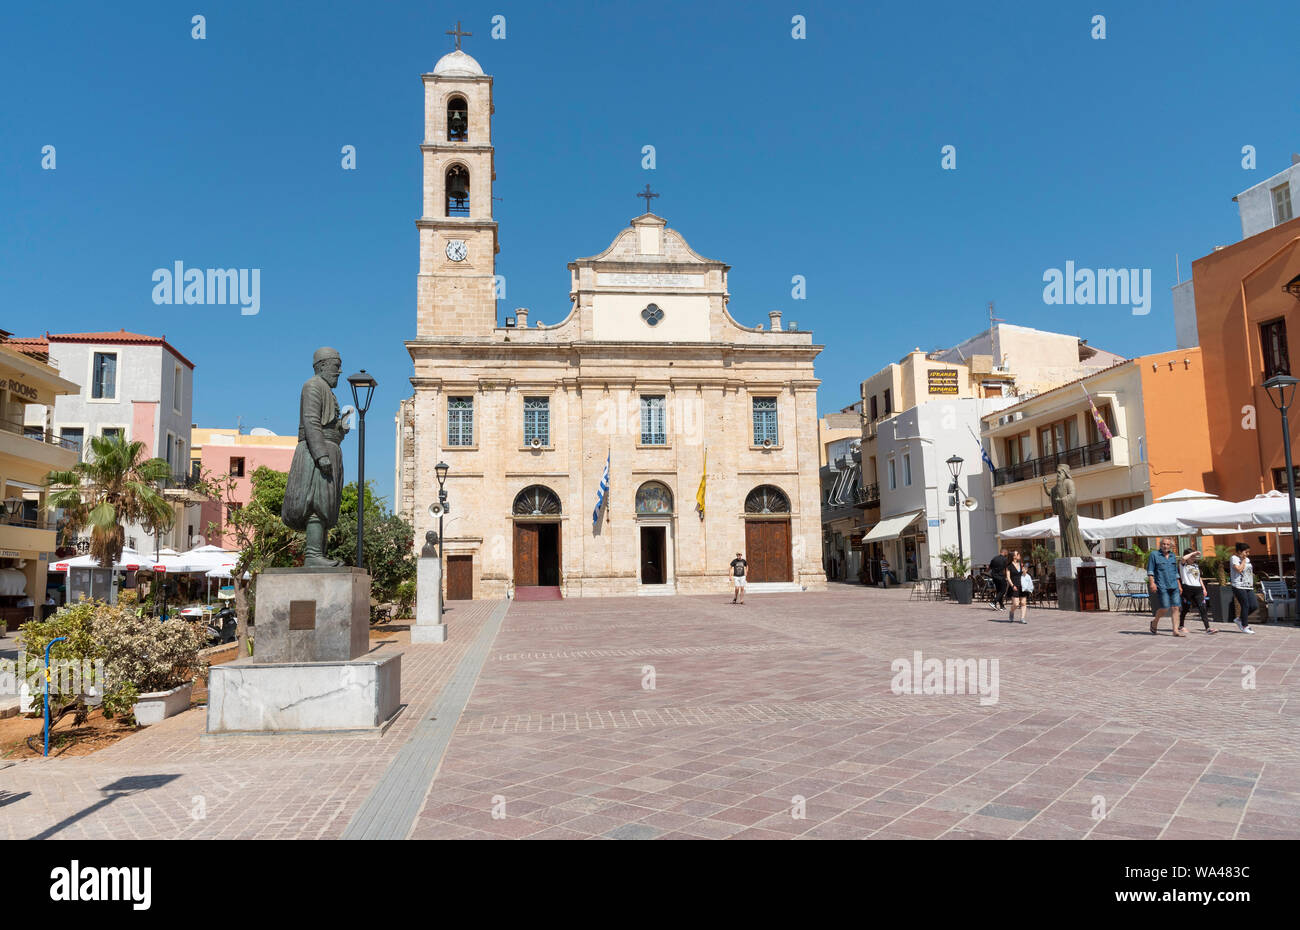 Chania, Crete, Greece. June 2019. Chania Cathedral dedicated to Panagia Trimartyri the Patron Saint of Chania in the old town centre. Stock Photo